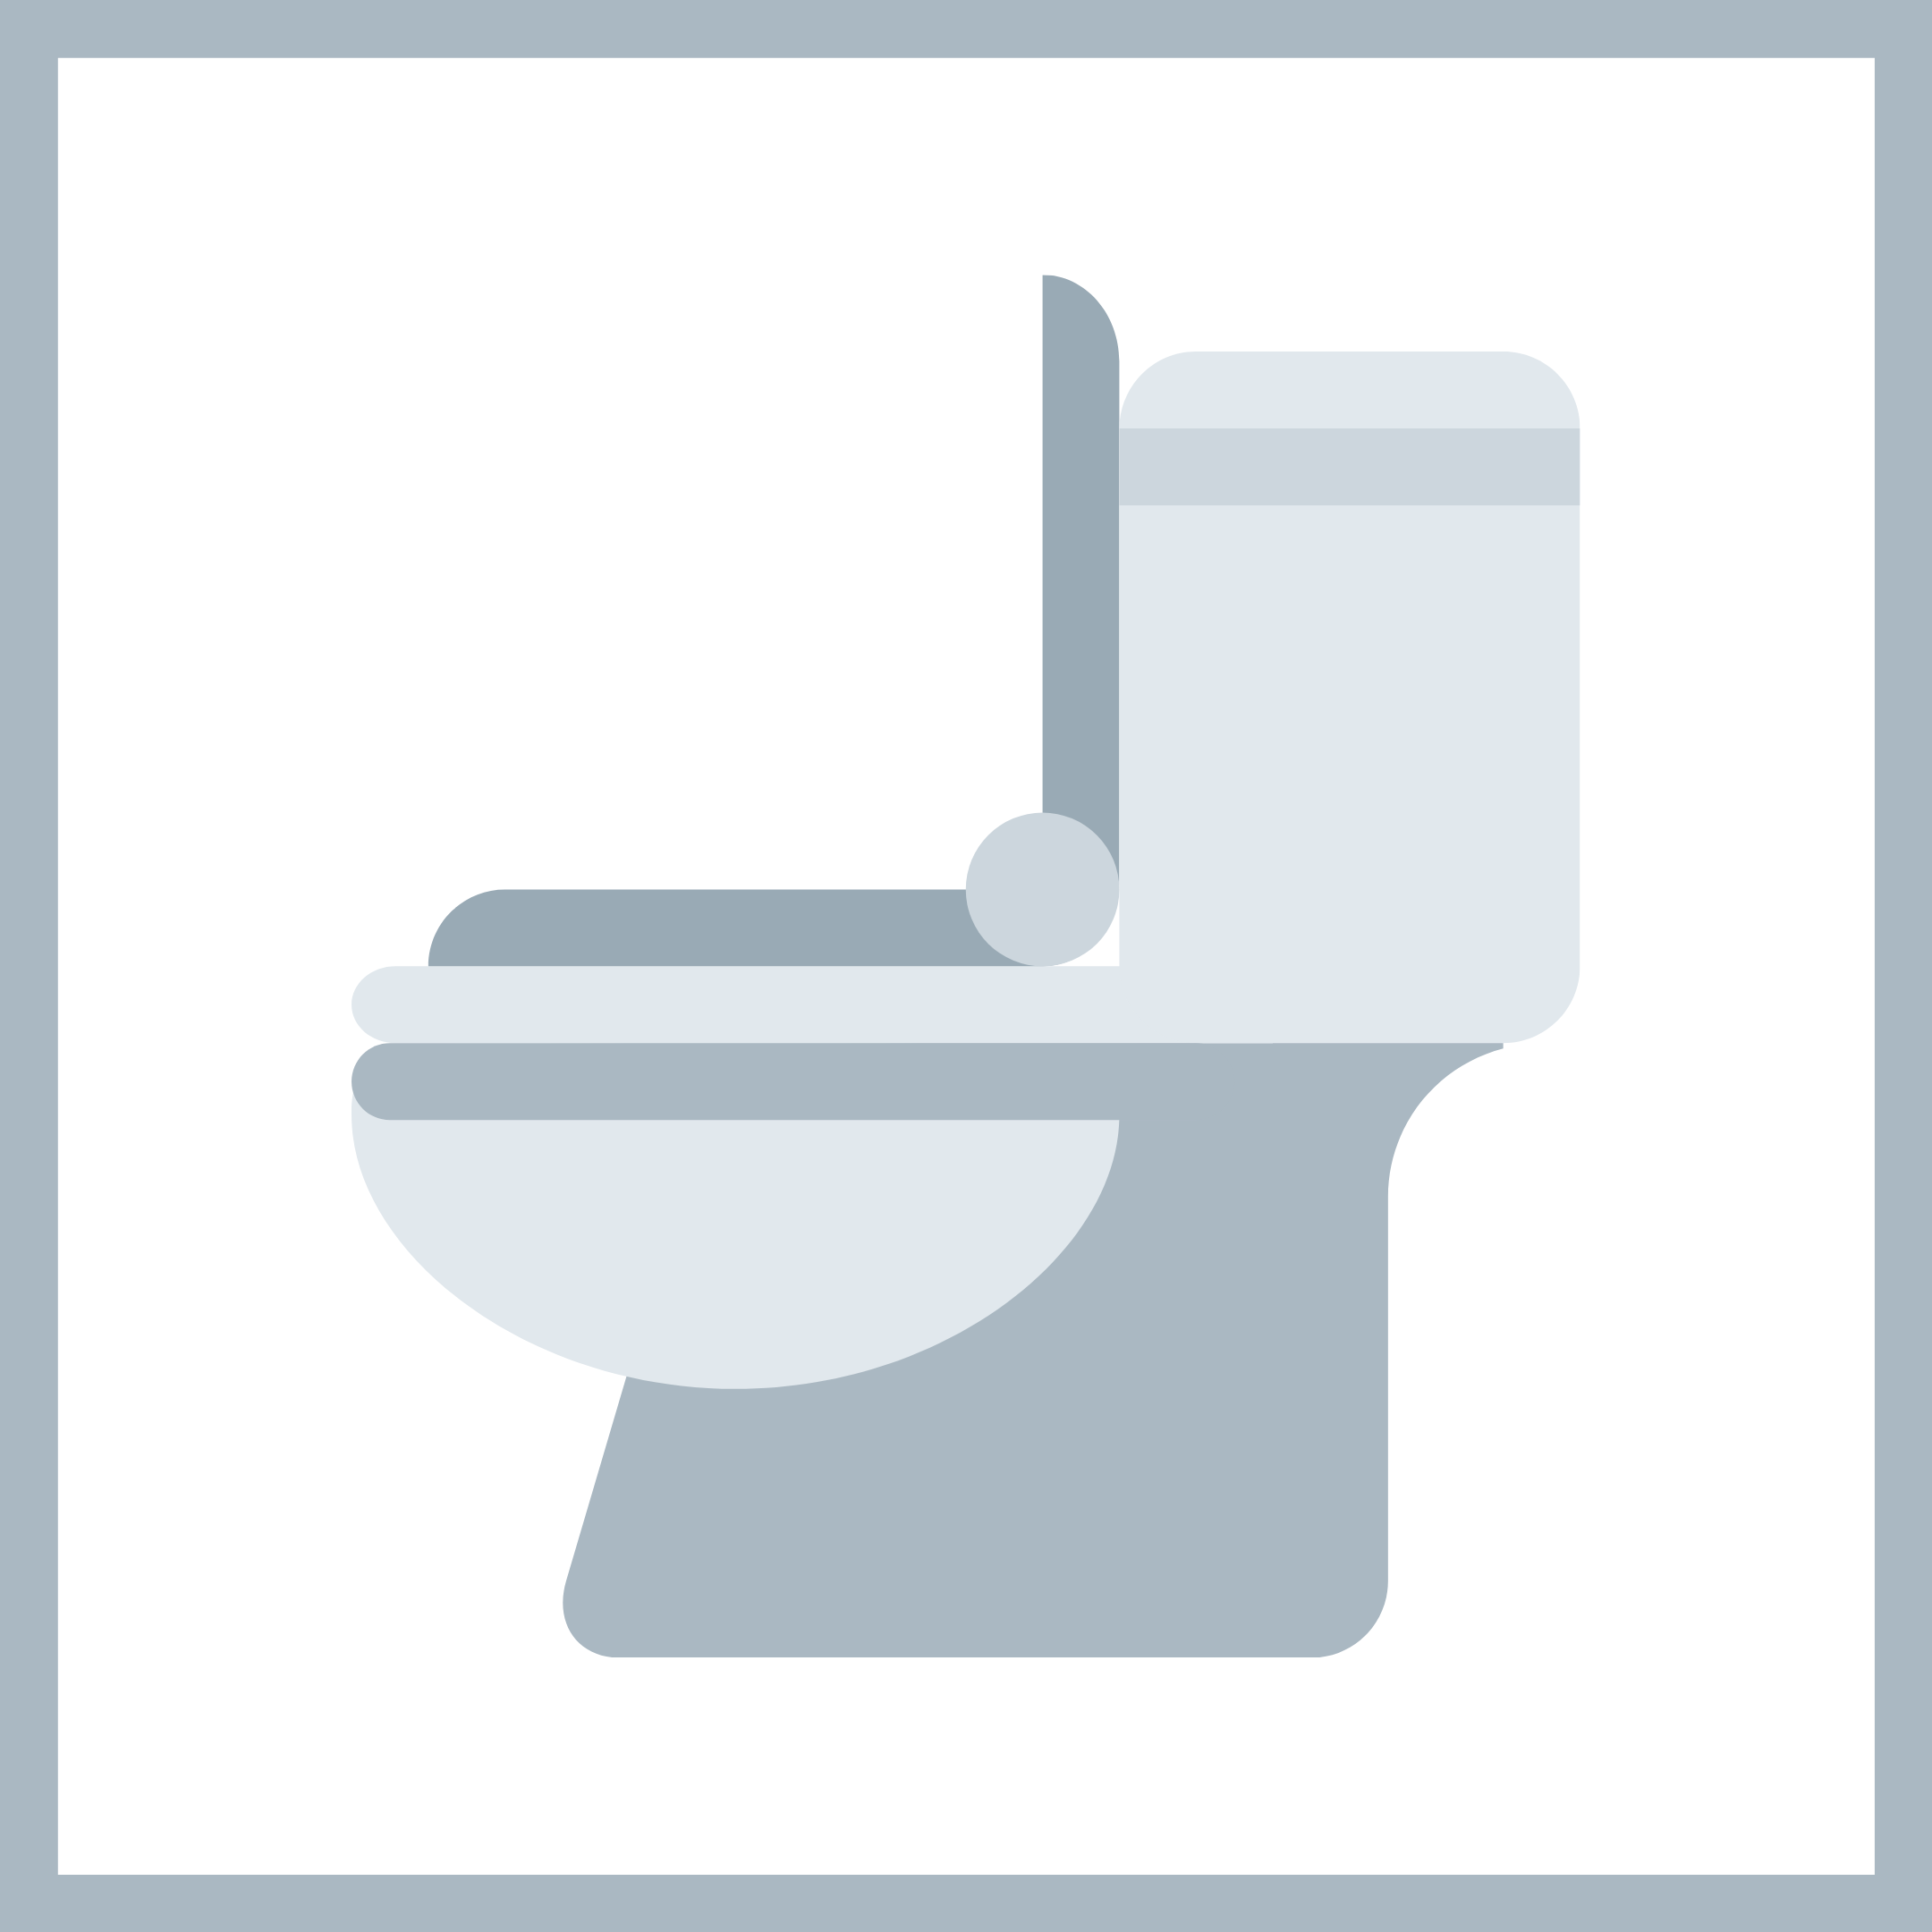 Illustration of a toilet